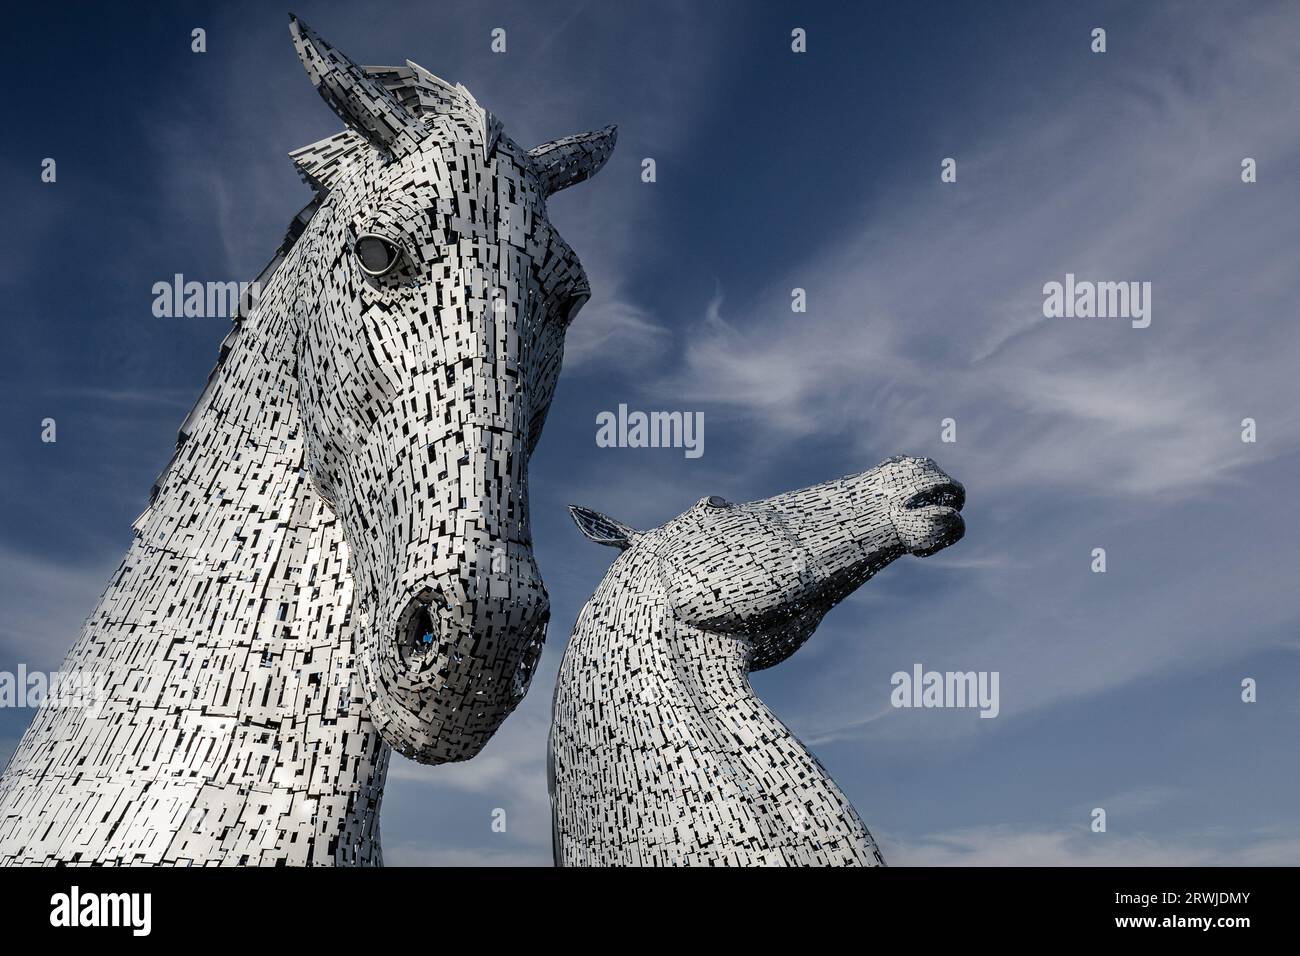 Falkirk,Scotland,UK -April 6th 2023:The Kelpies are two horse-head sculptures located near Falkirk in Central Scotland. Testament to the role the heav Stock Photo